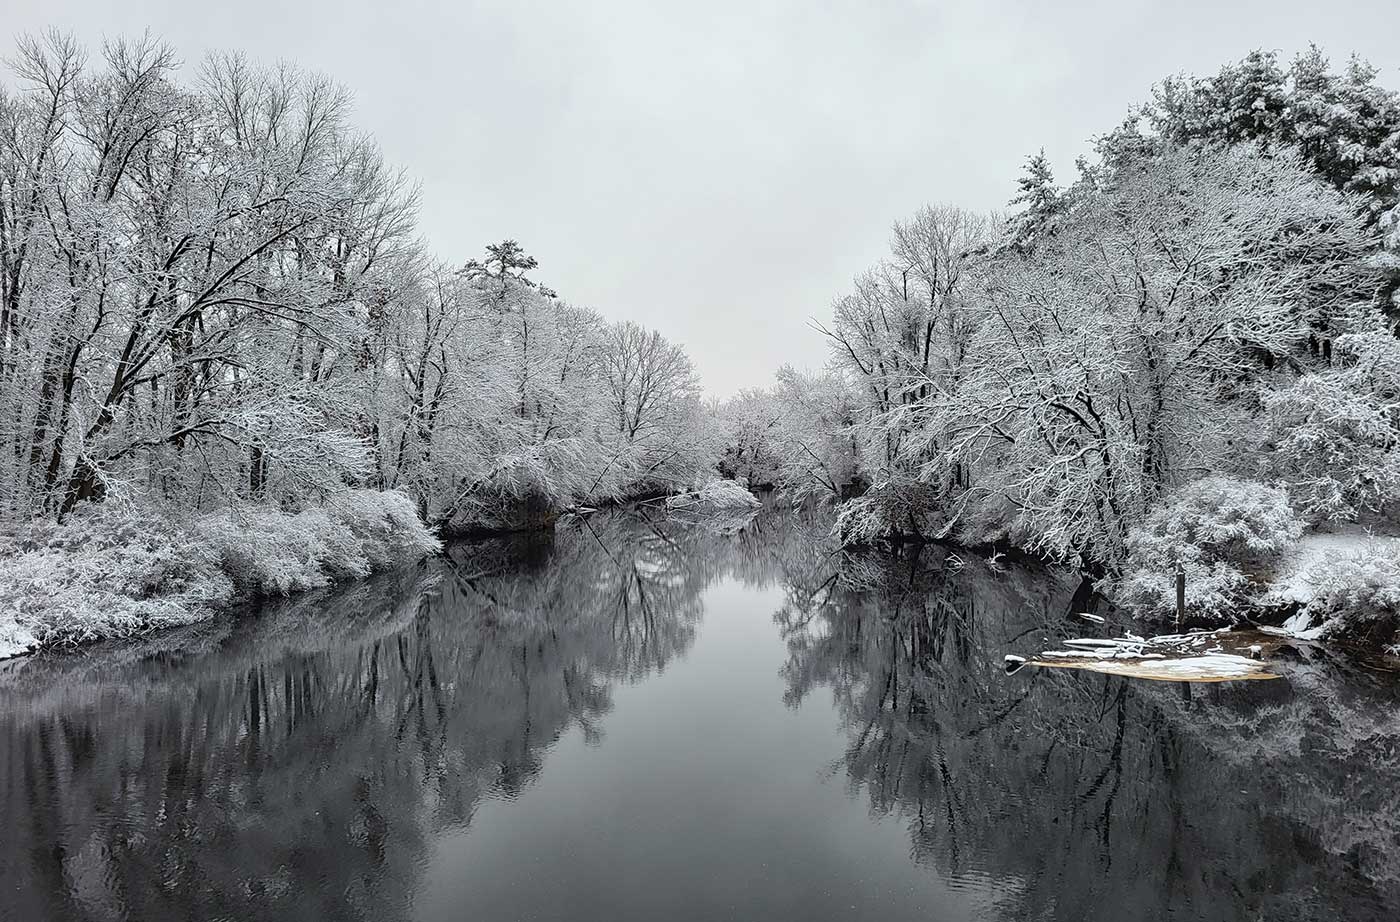 River with snow-covered trees lining it on either side